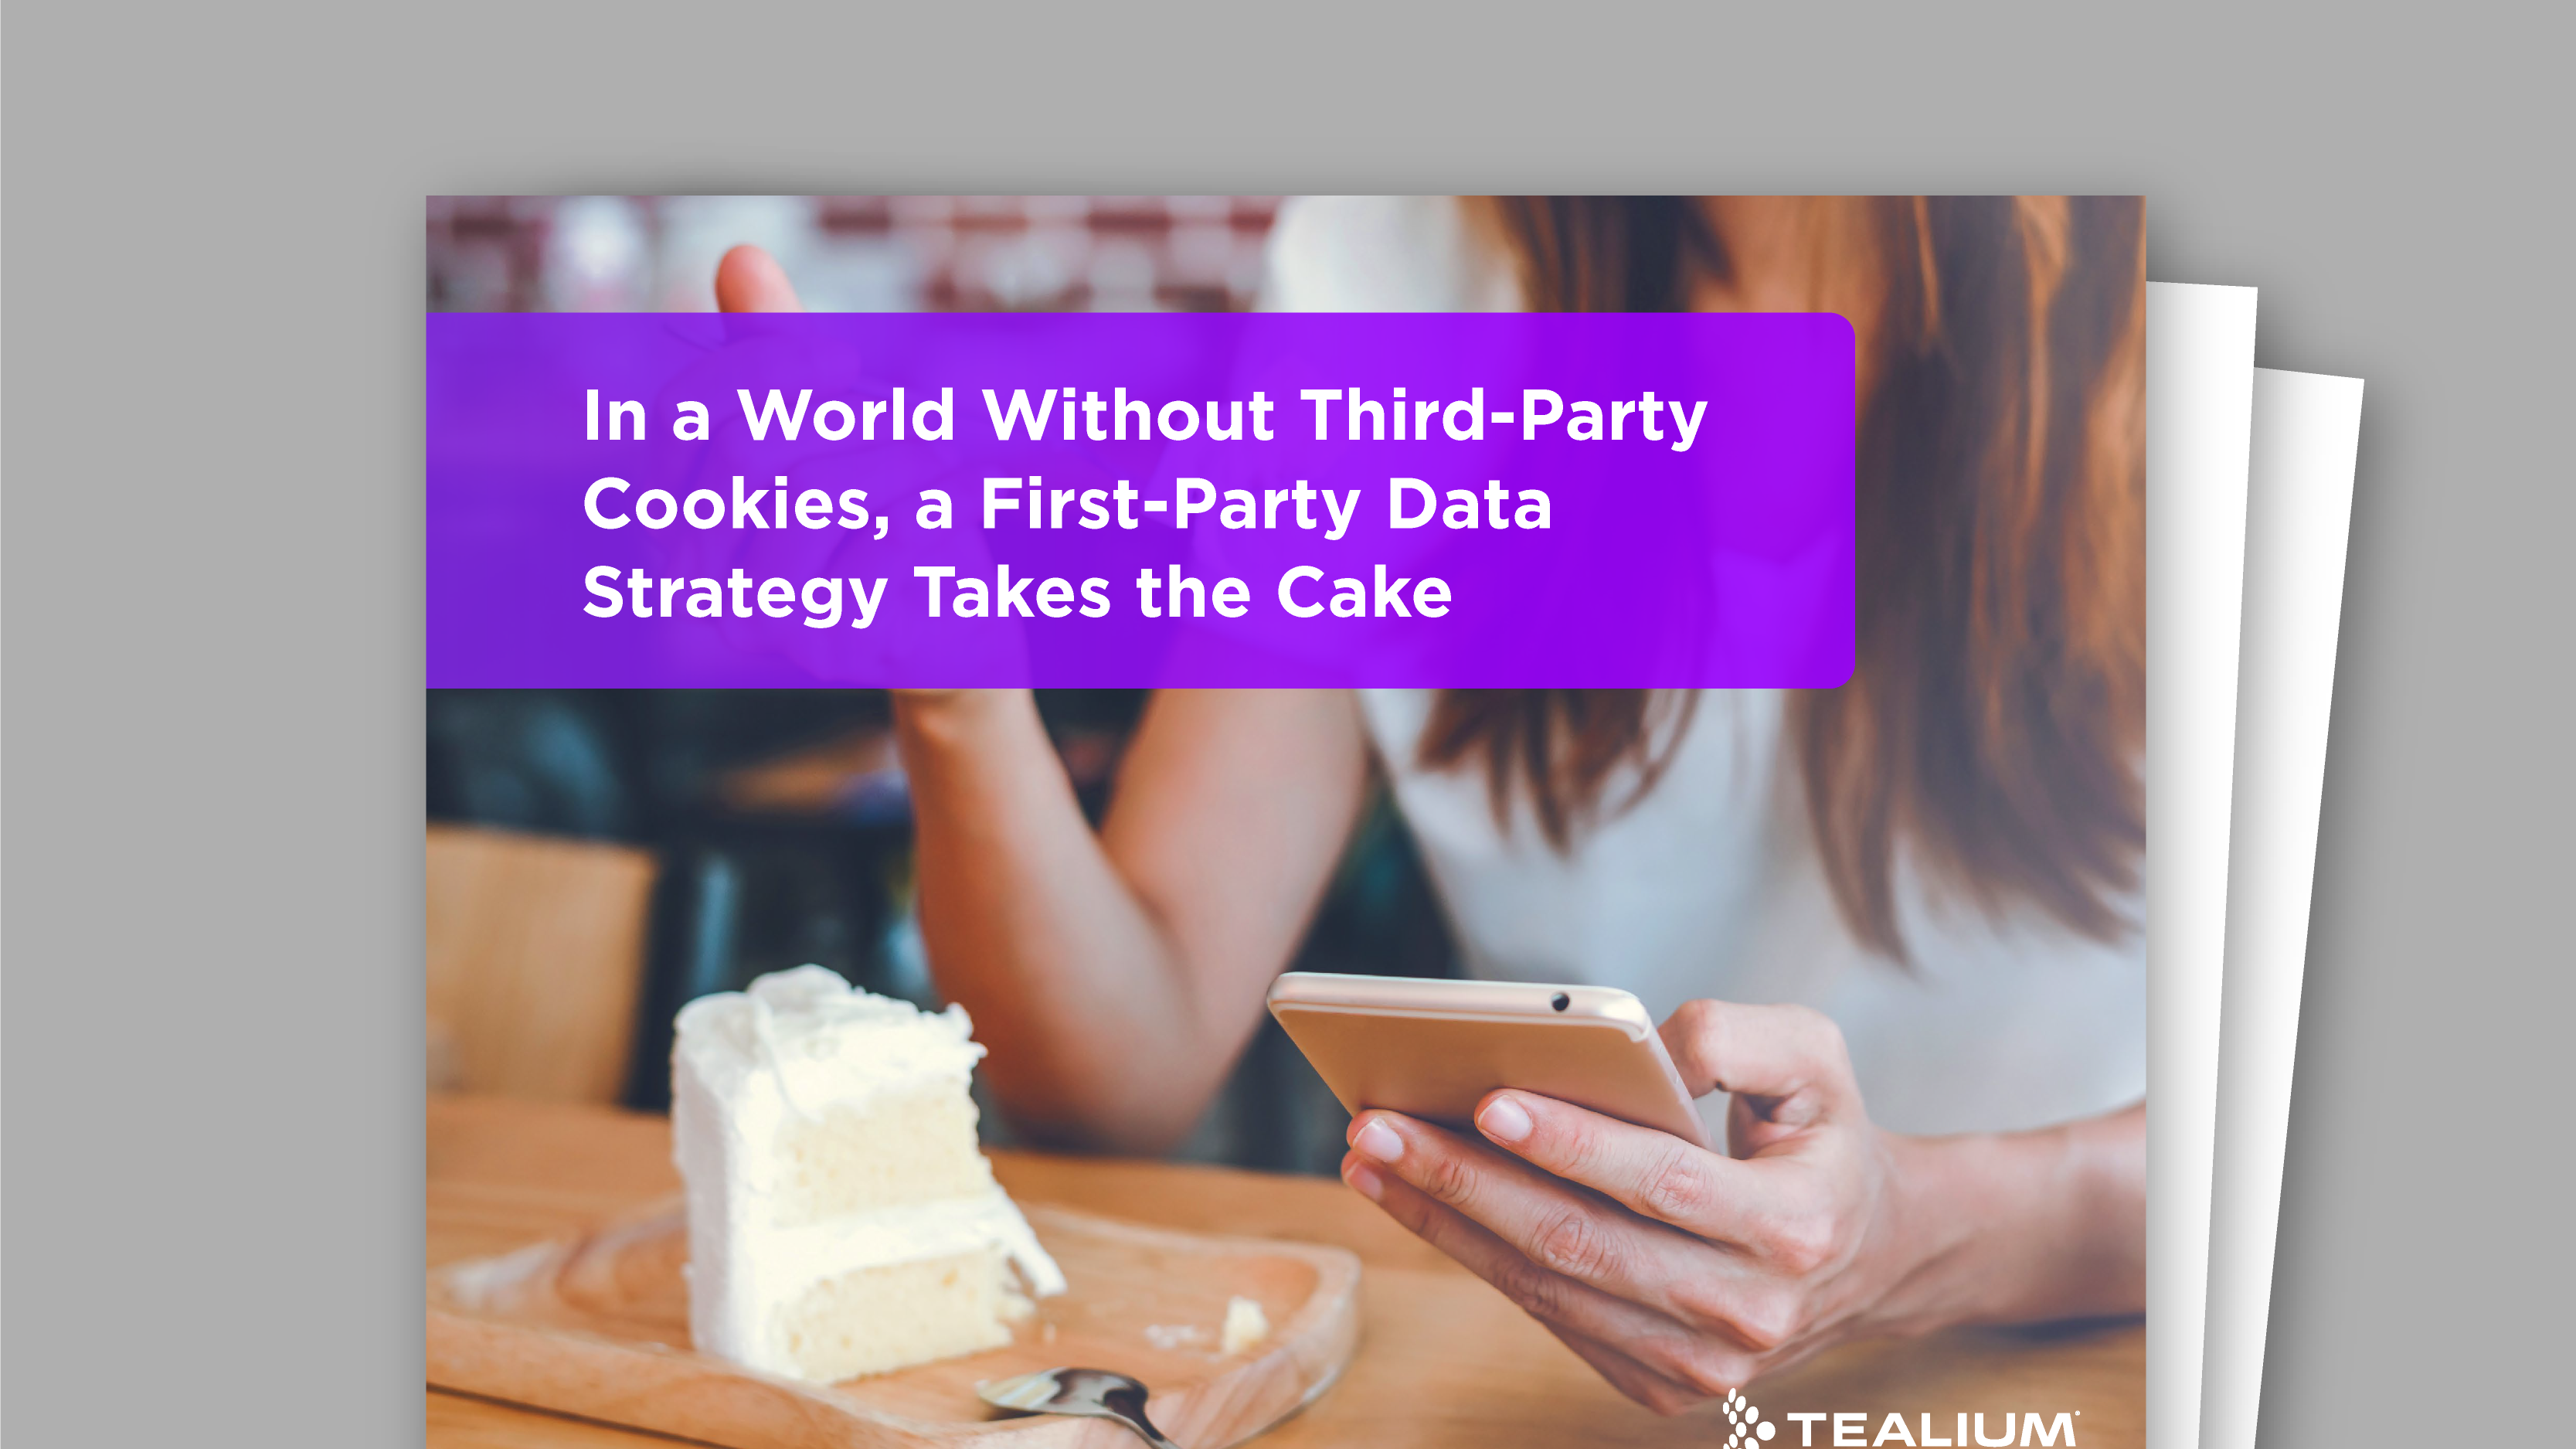 First-Party Data Takes the Cake